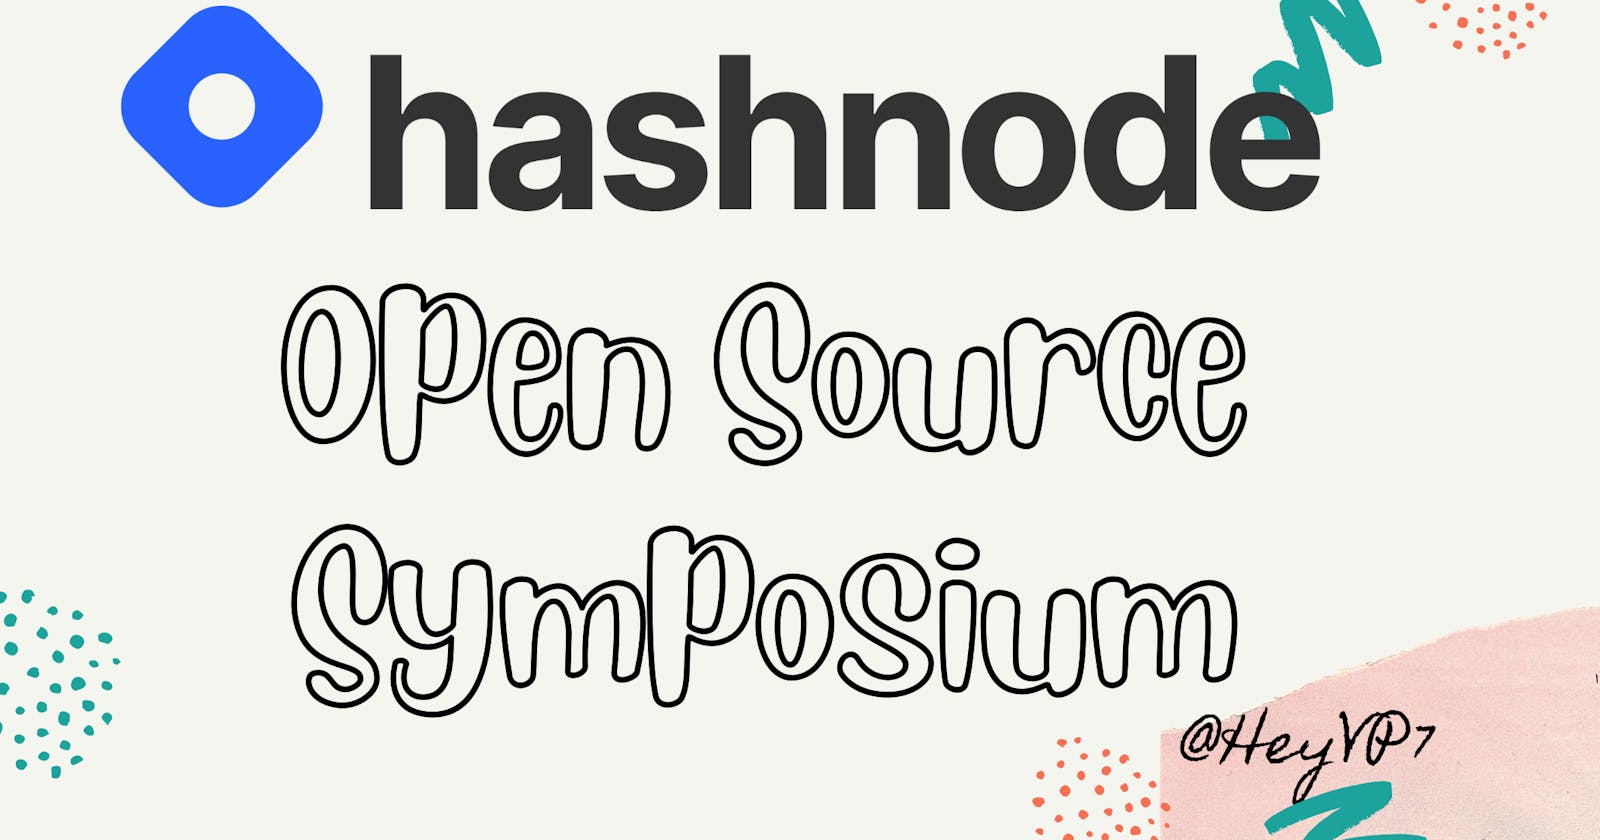 Open Source Symposium by Hashnode